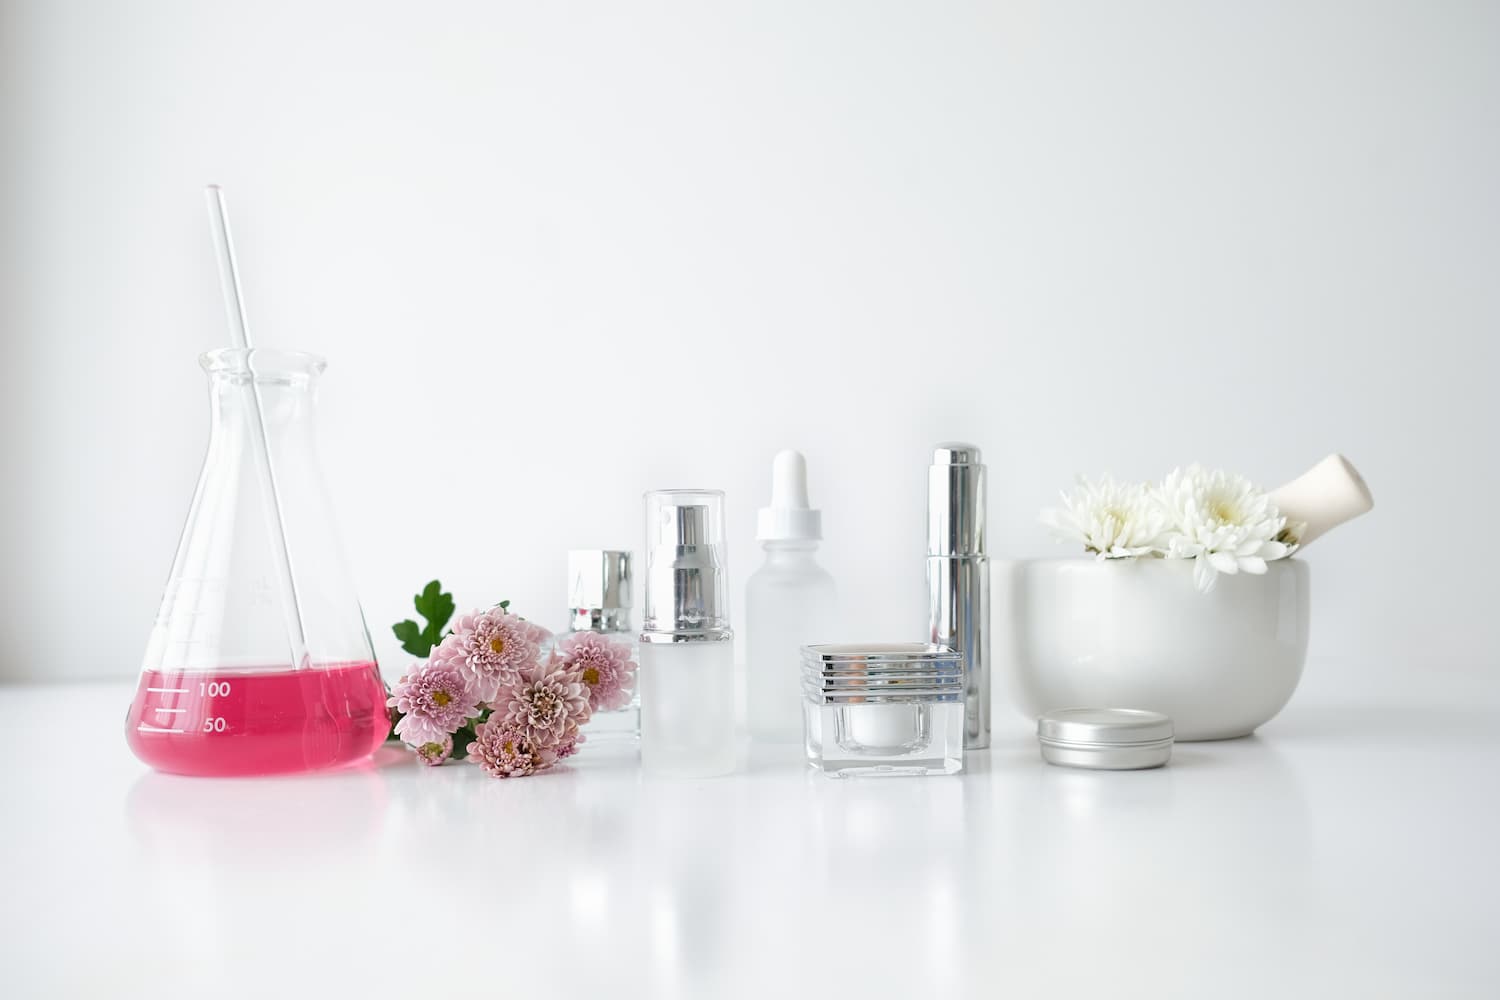 Collection of bottles and containers on white countertop